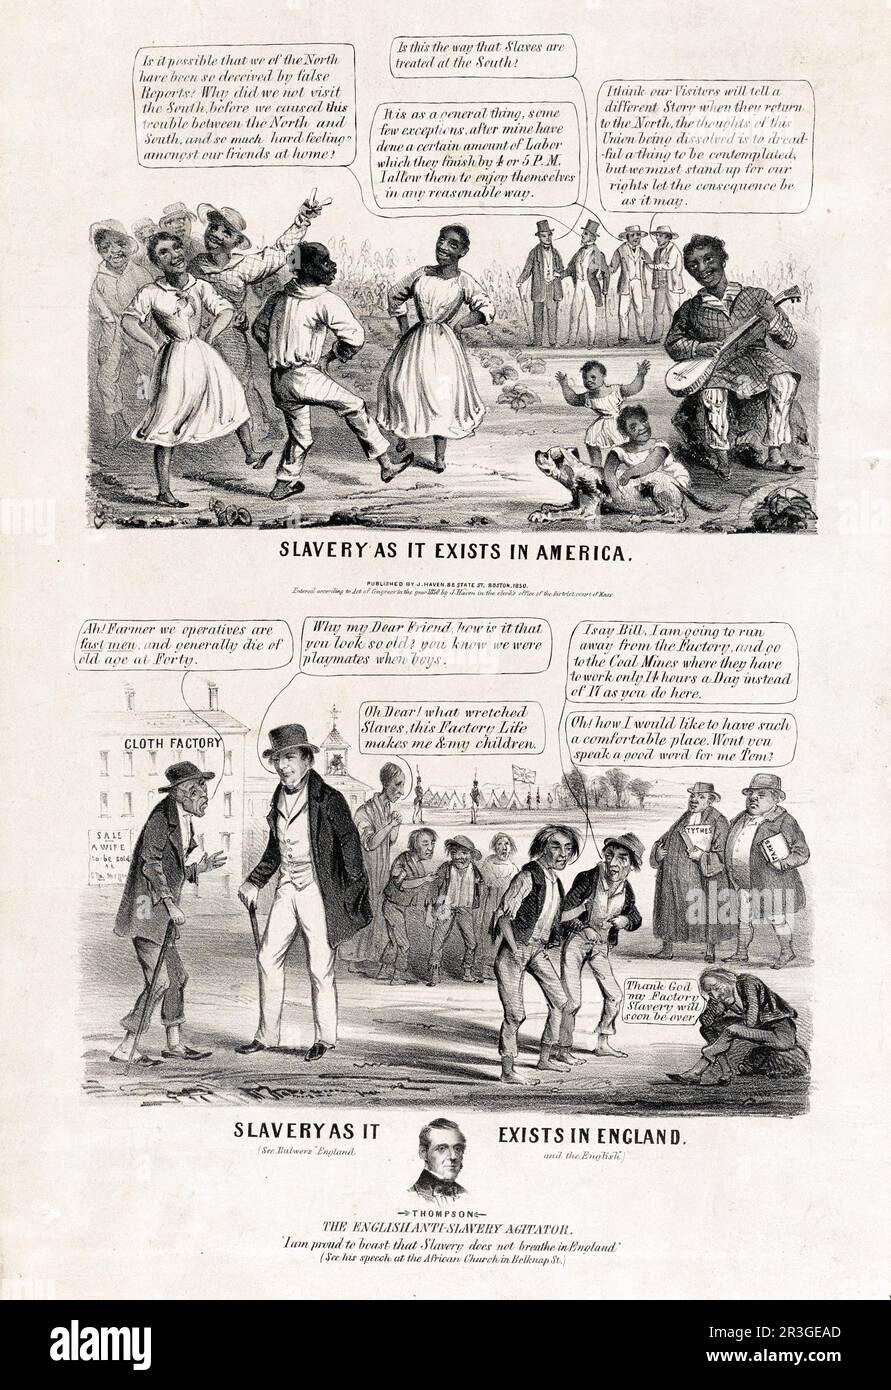 Slavery as it exists in America compared to slavery as it exists in England. Stock Photo